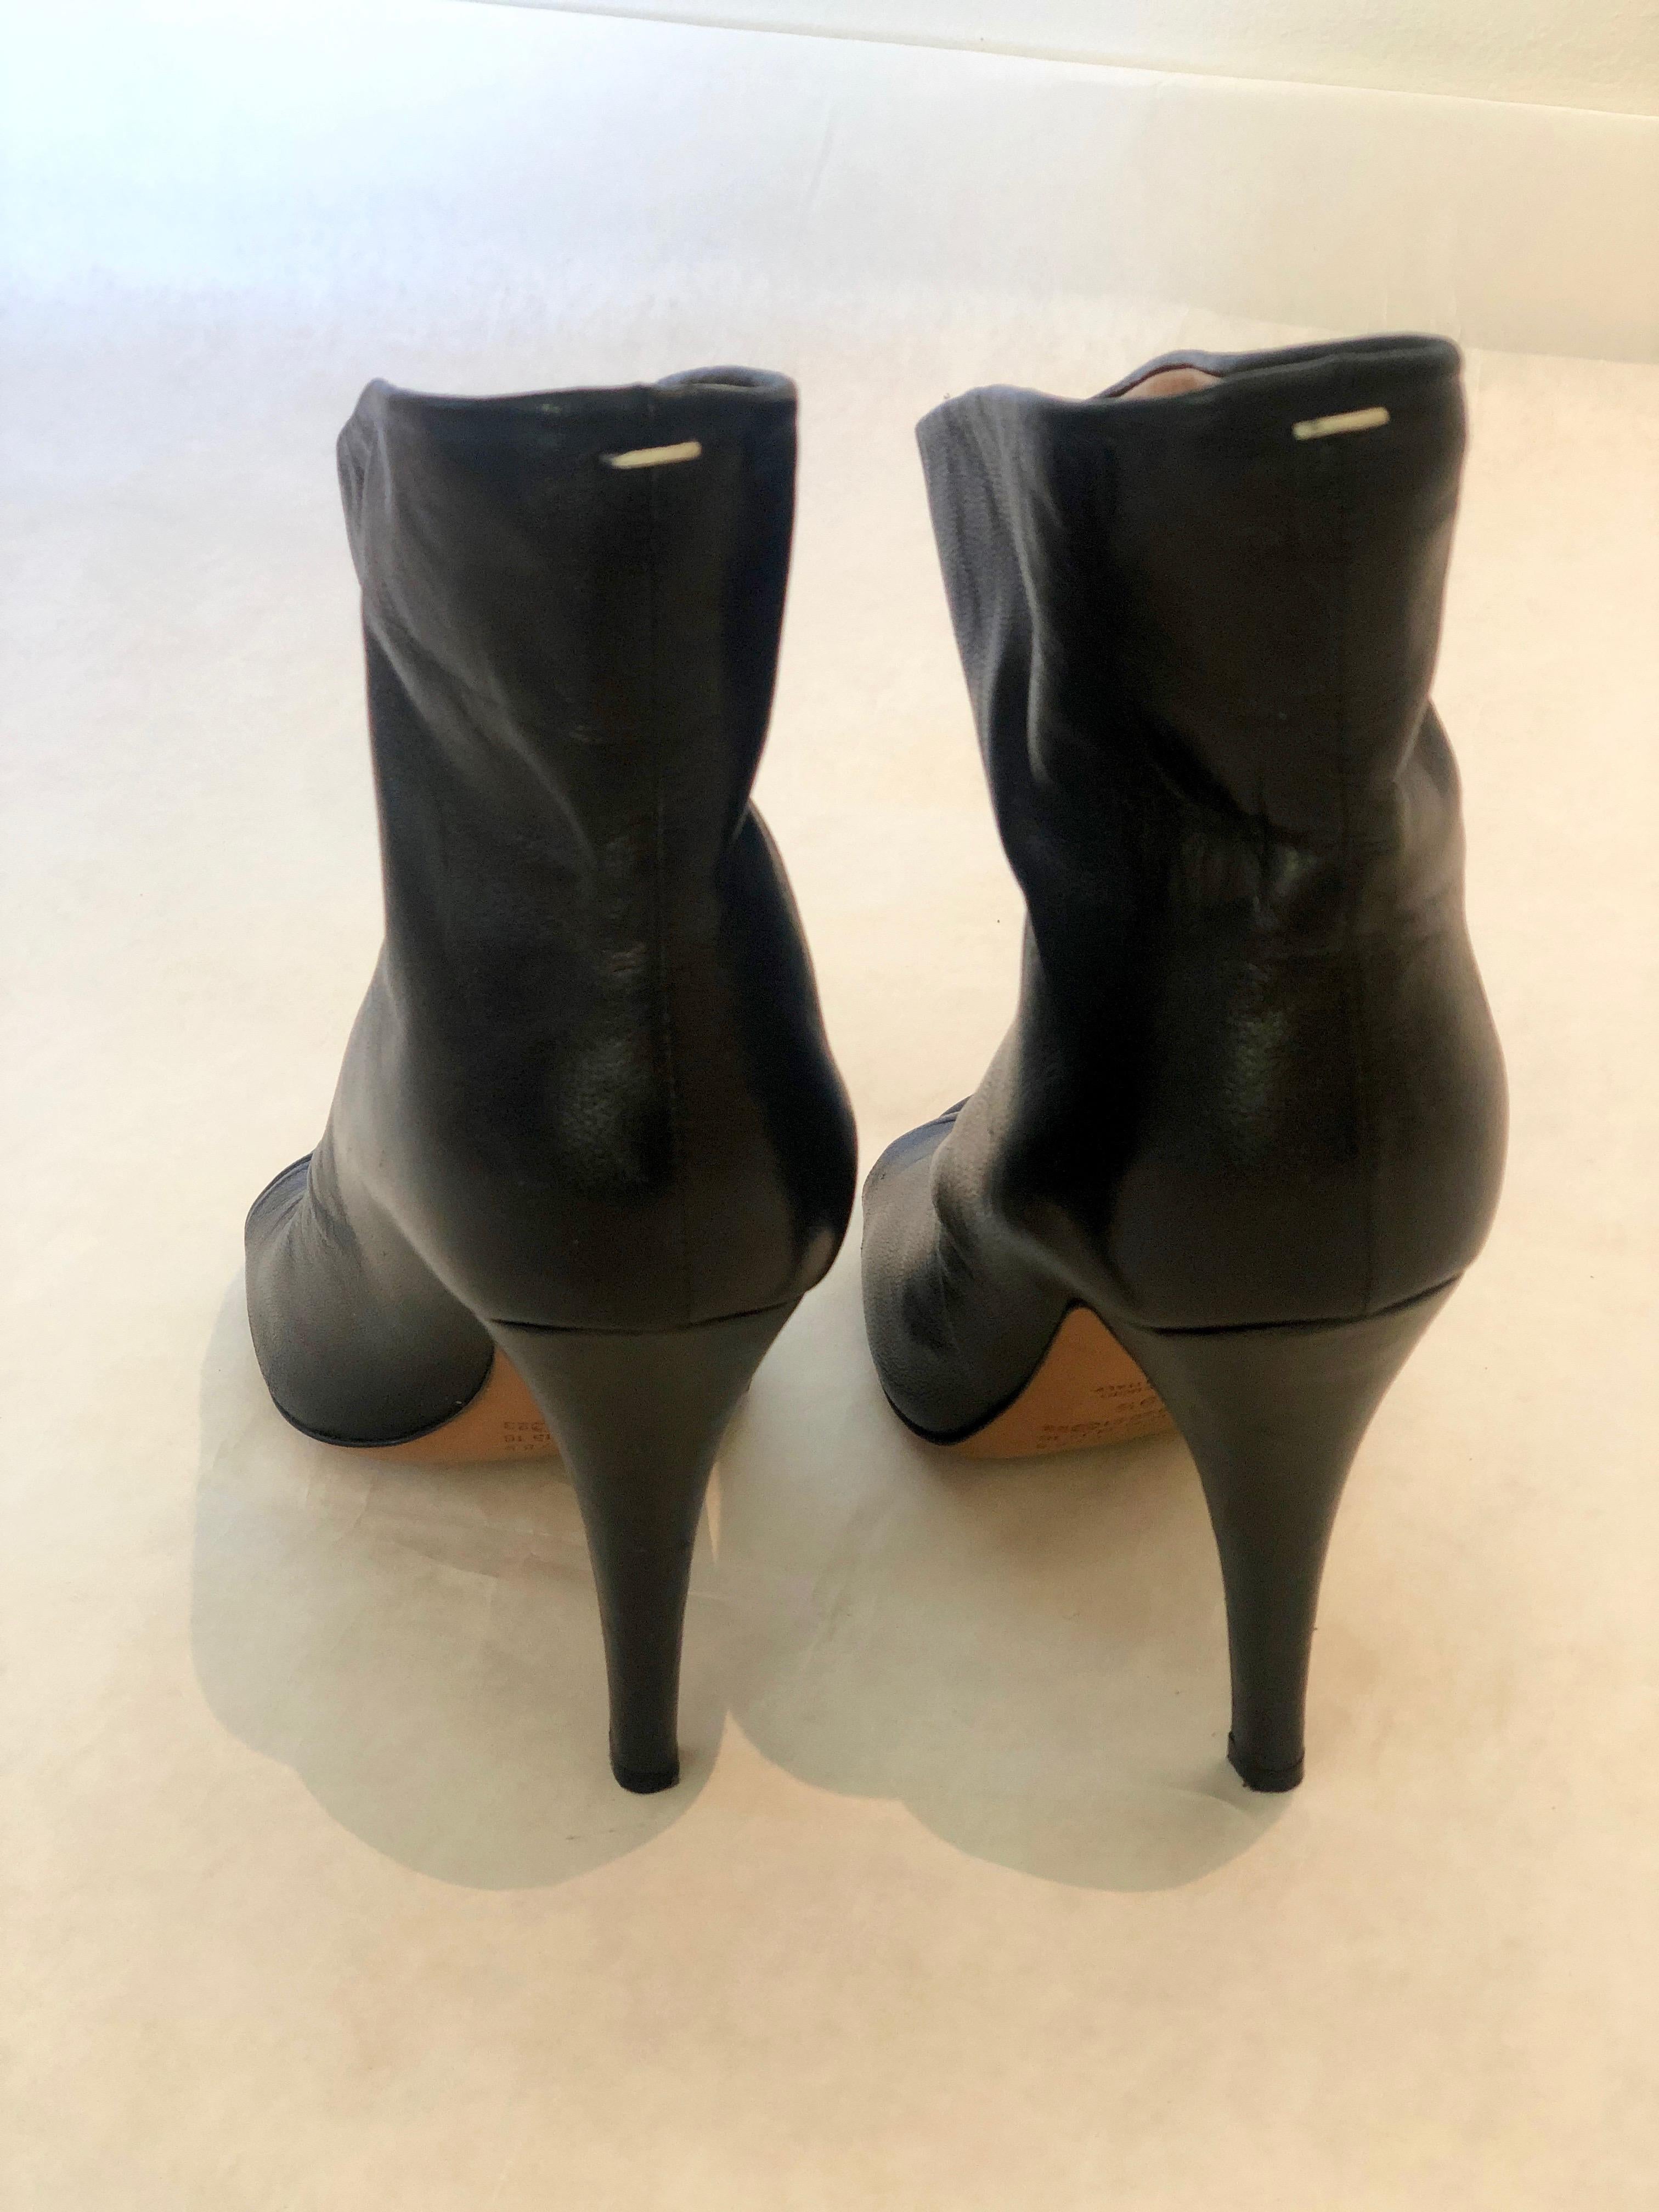 Pair of Maison Martin Margiala Black Open Toe Ankle Boots w/ Wide Unfitted Top  For Sale 2